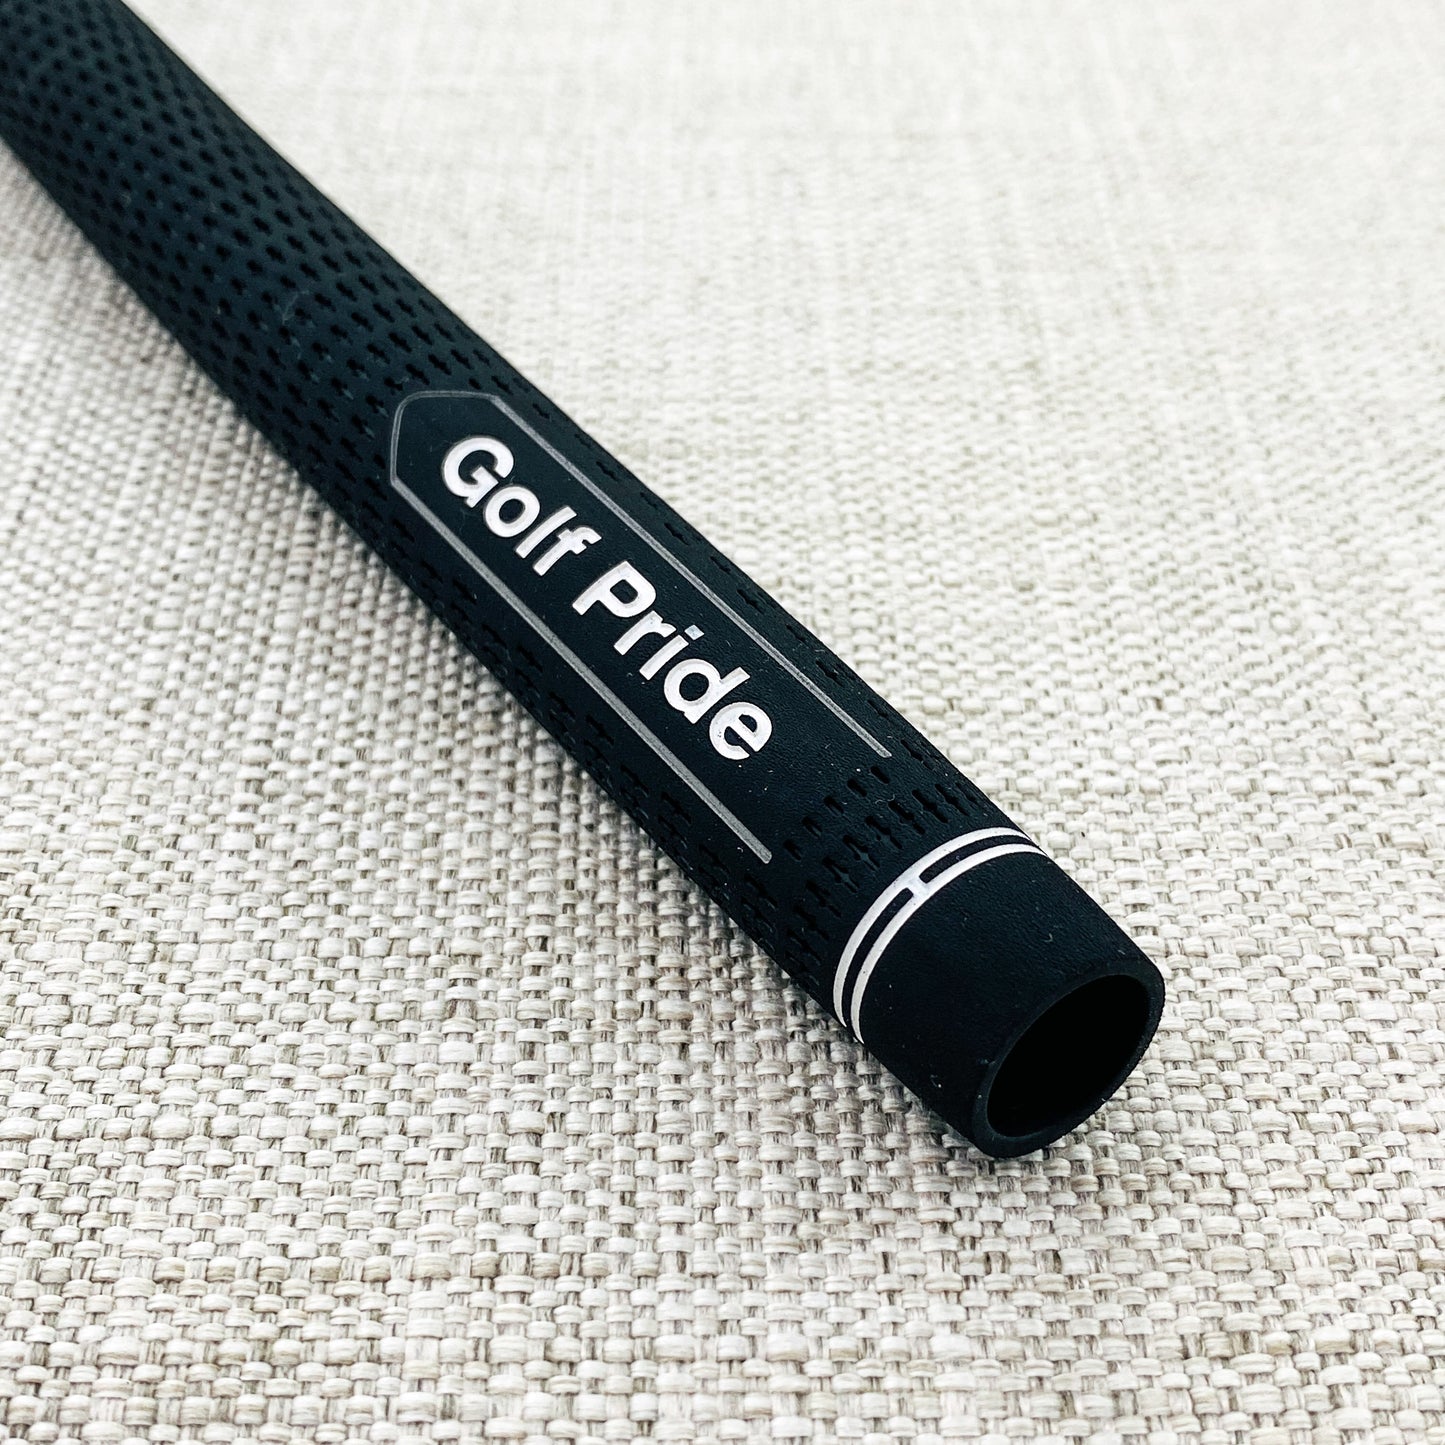 Golf Pride Tour Velvet +4 swing grip. Choice of size. Black - Price includes fitment.